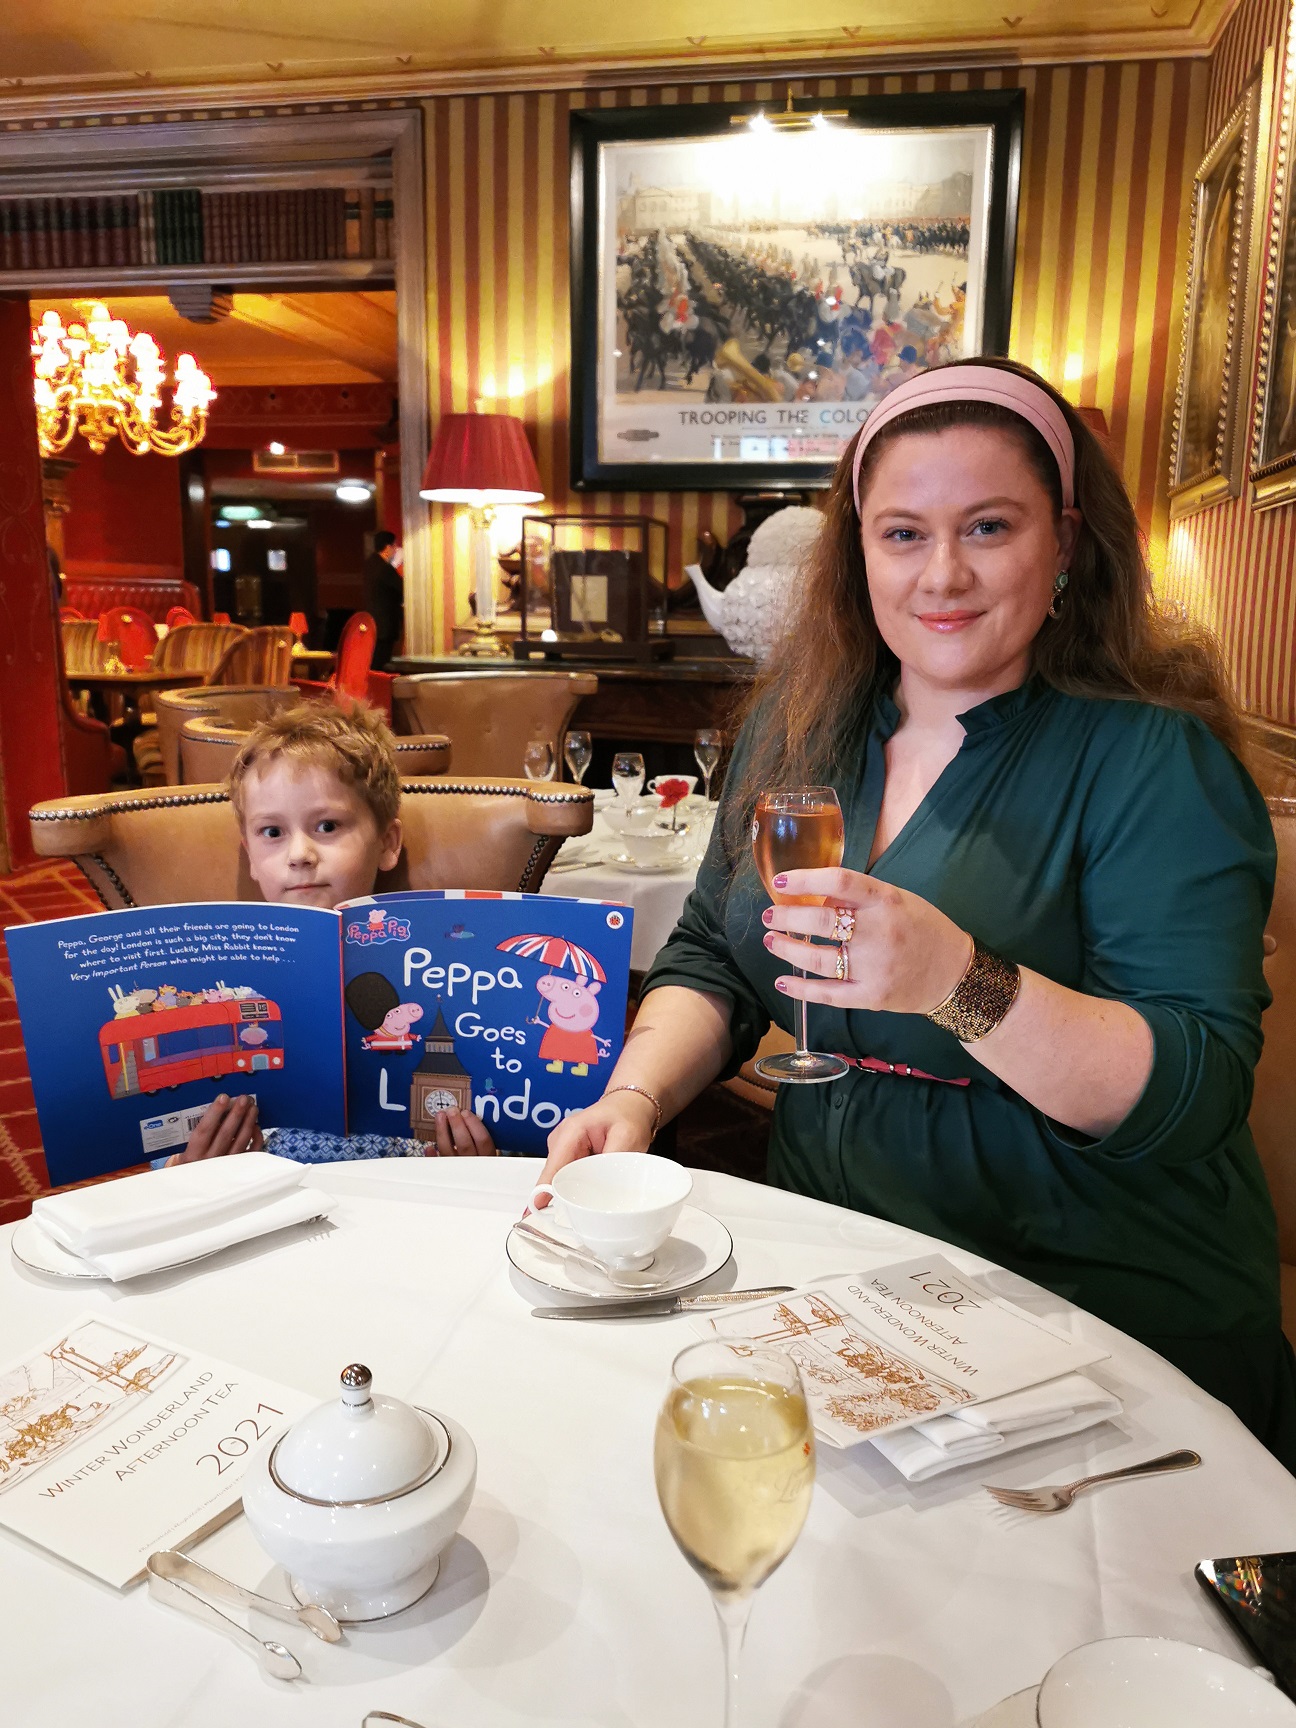 The Rubens Hotel, Red Letter Days, Experience Day Vouchers, The Rubens At The Palace, Afternoon Tea, Winter Wonderland Afternoon Tea, Afternoon Tea London, London with Kids, Xmas Giveaways, Win, Competition, Buckingham Palace, London, the Frenchie Mummy